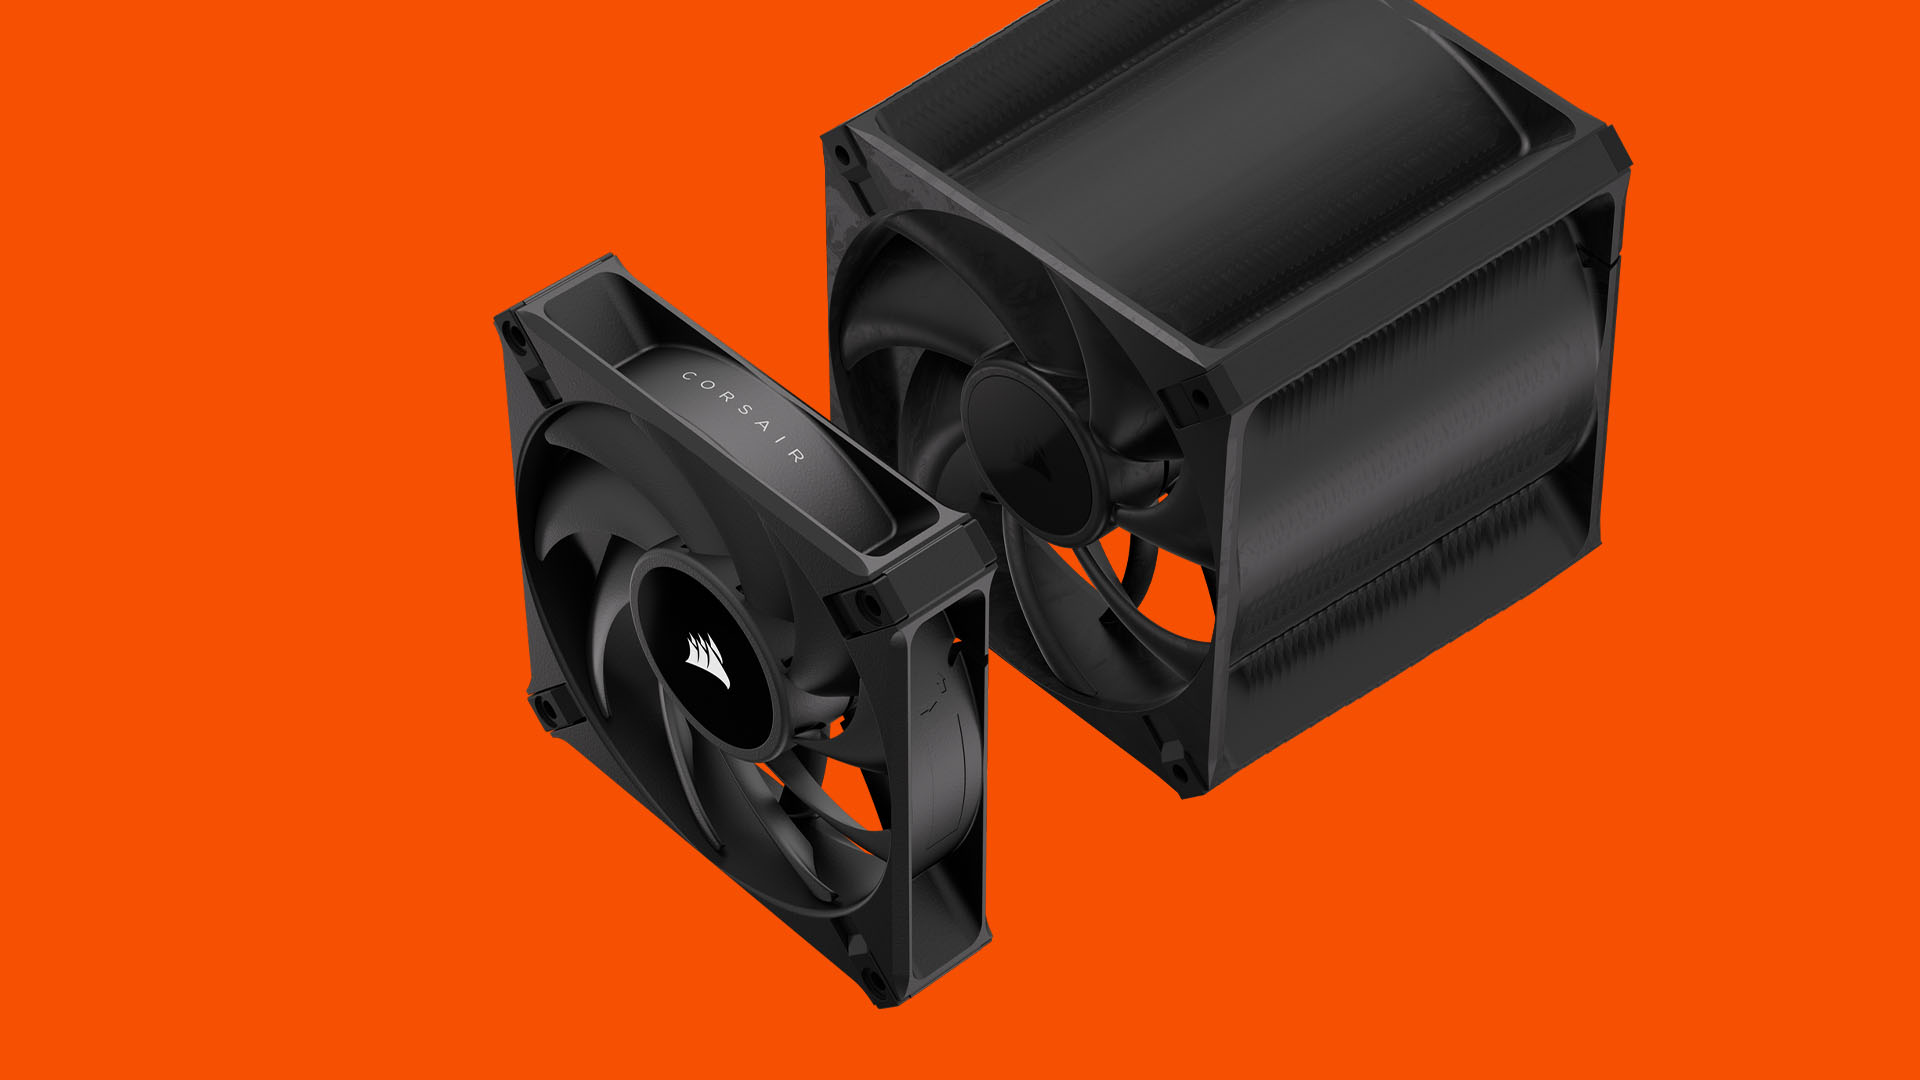 Corsair's new fans are cooler and quieter, thanks to one small change